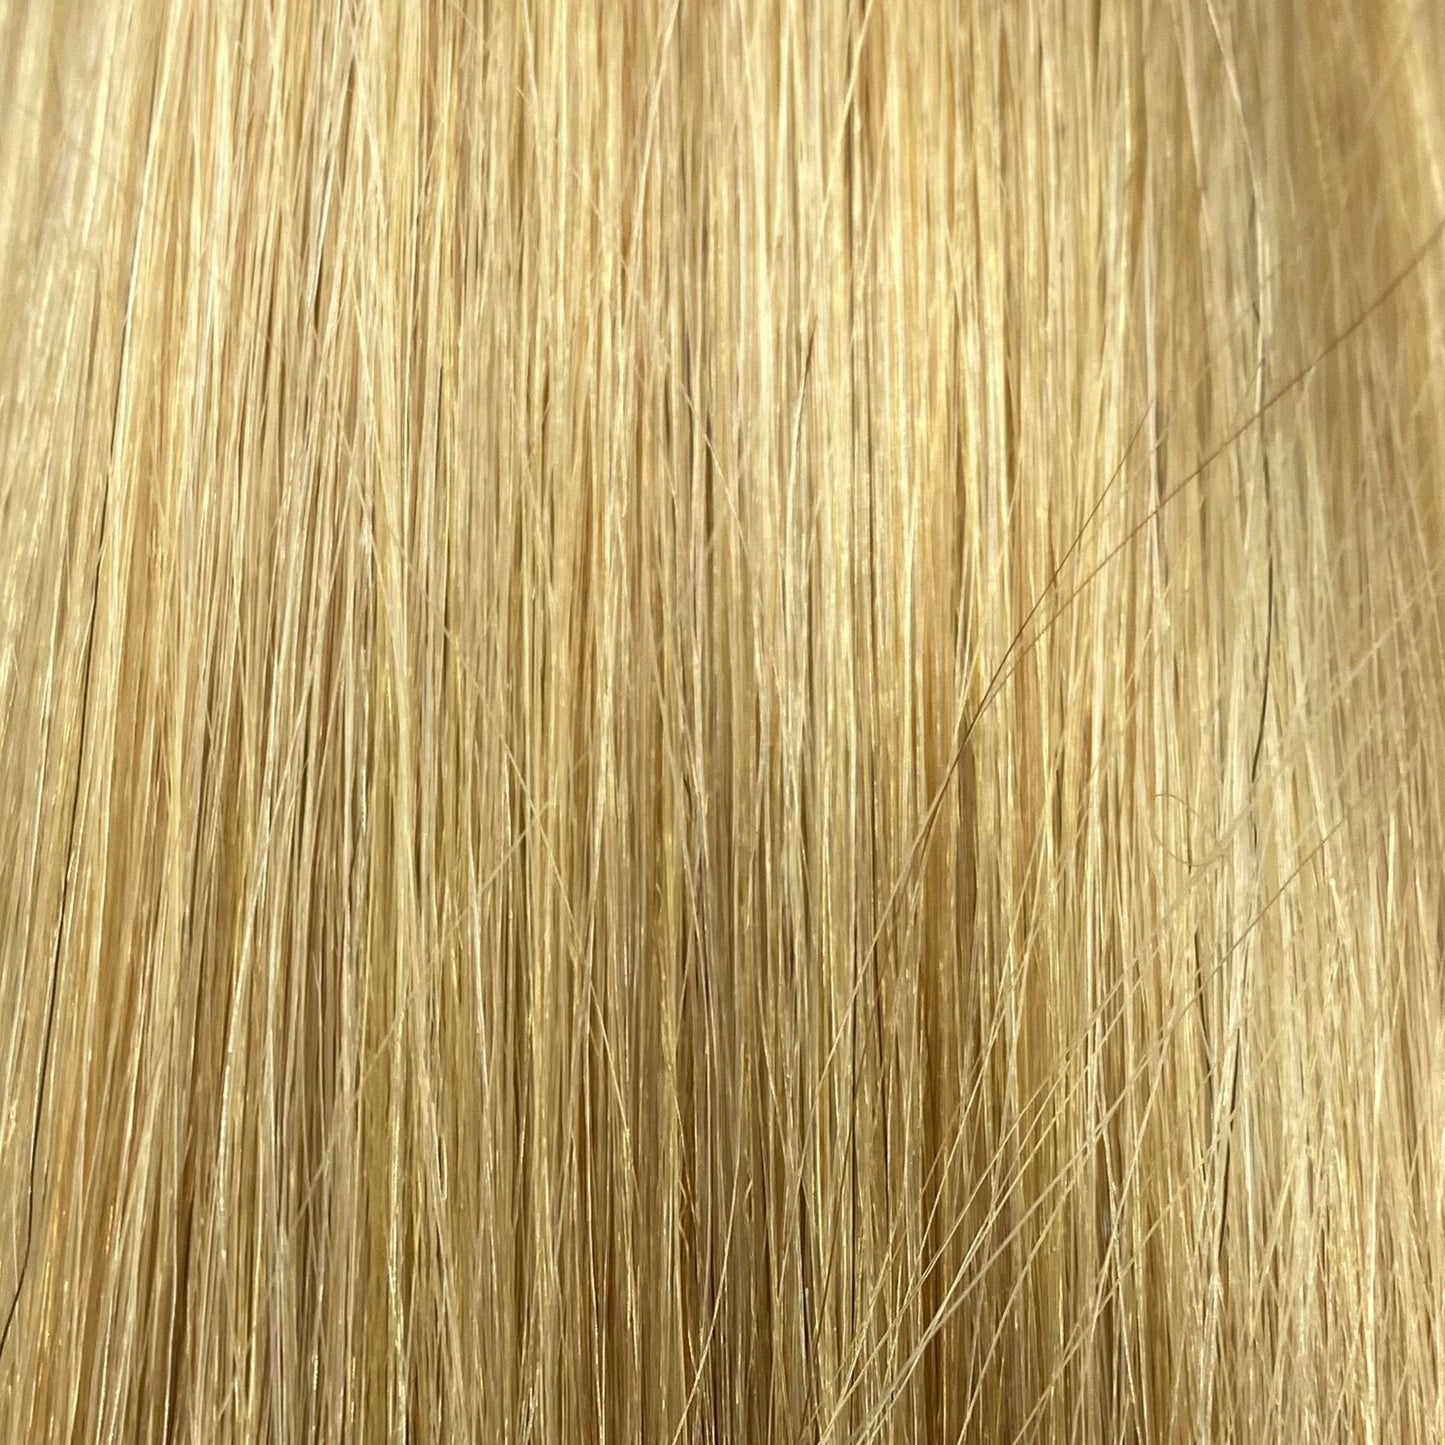 Fusion hair  extensions #140 - 40cm/16 inches - Golden Ultra Blonde Fusion Euro So Cap 